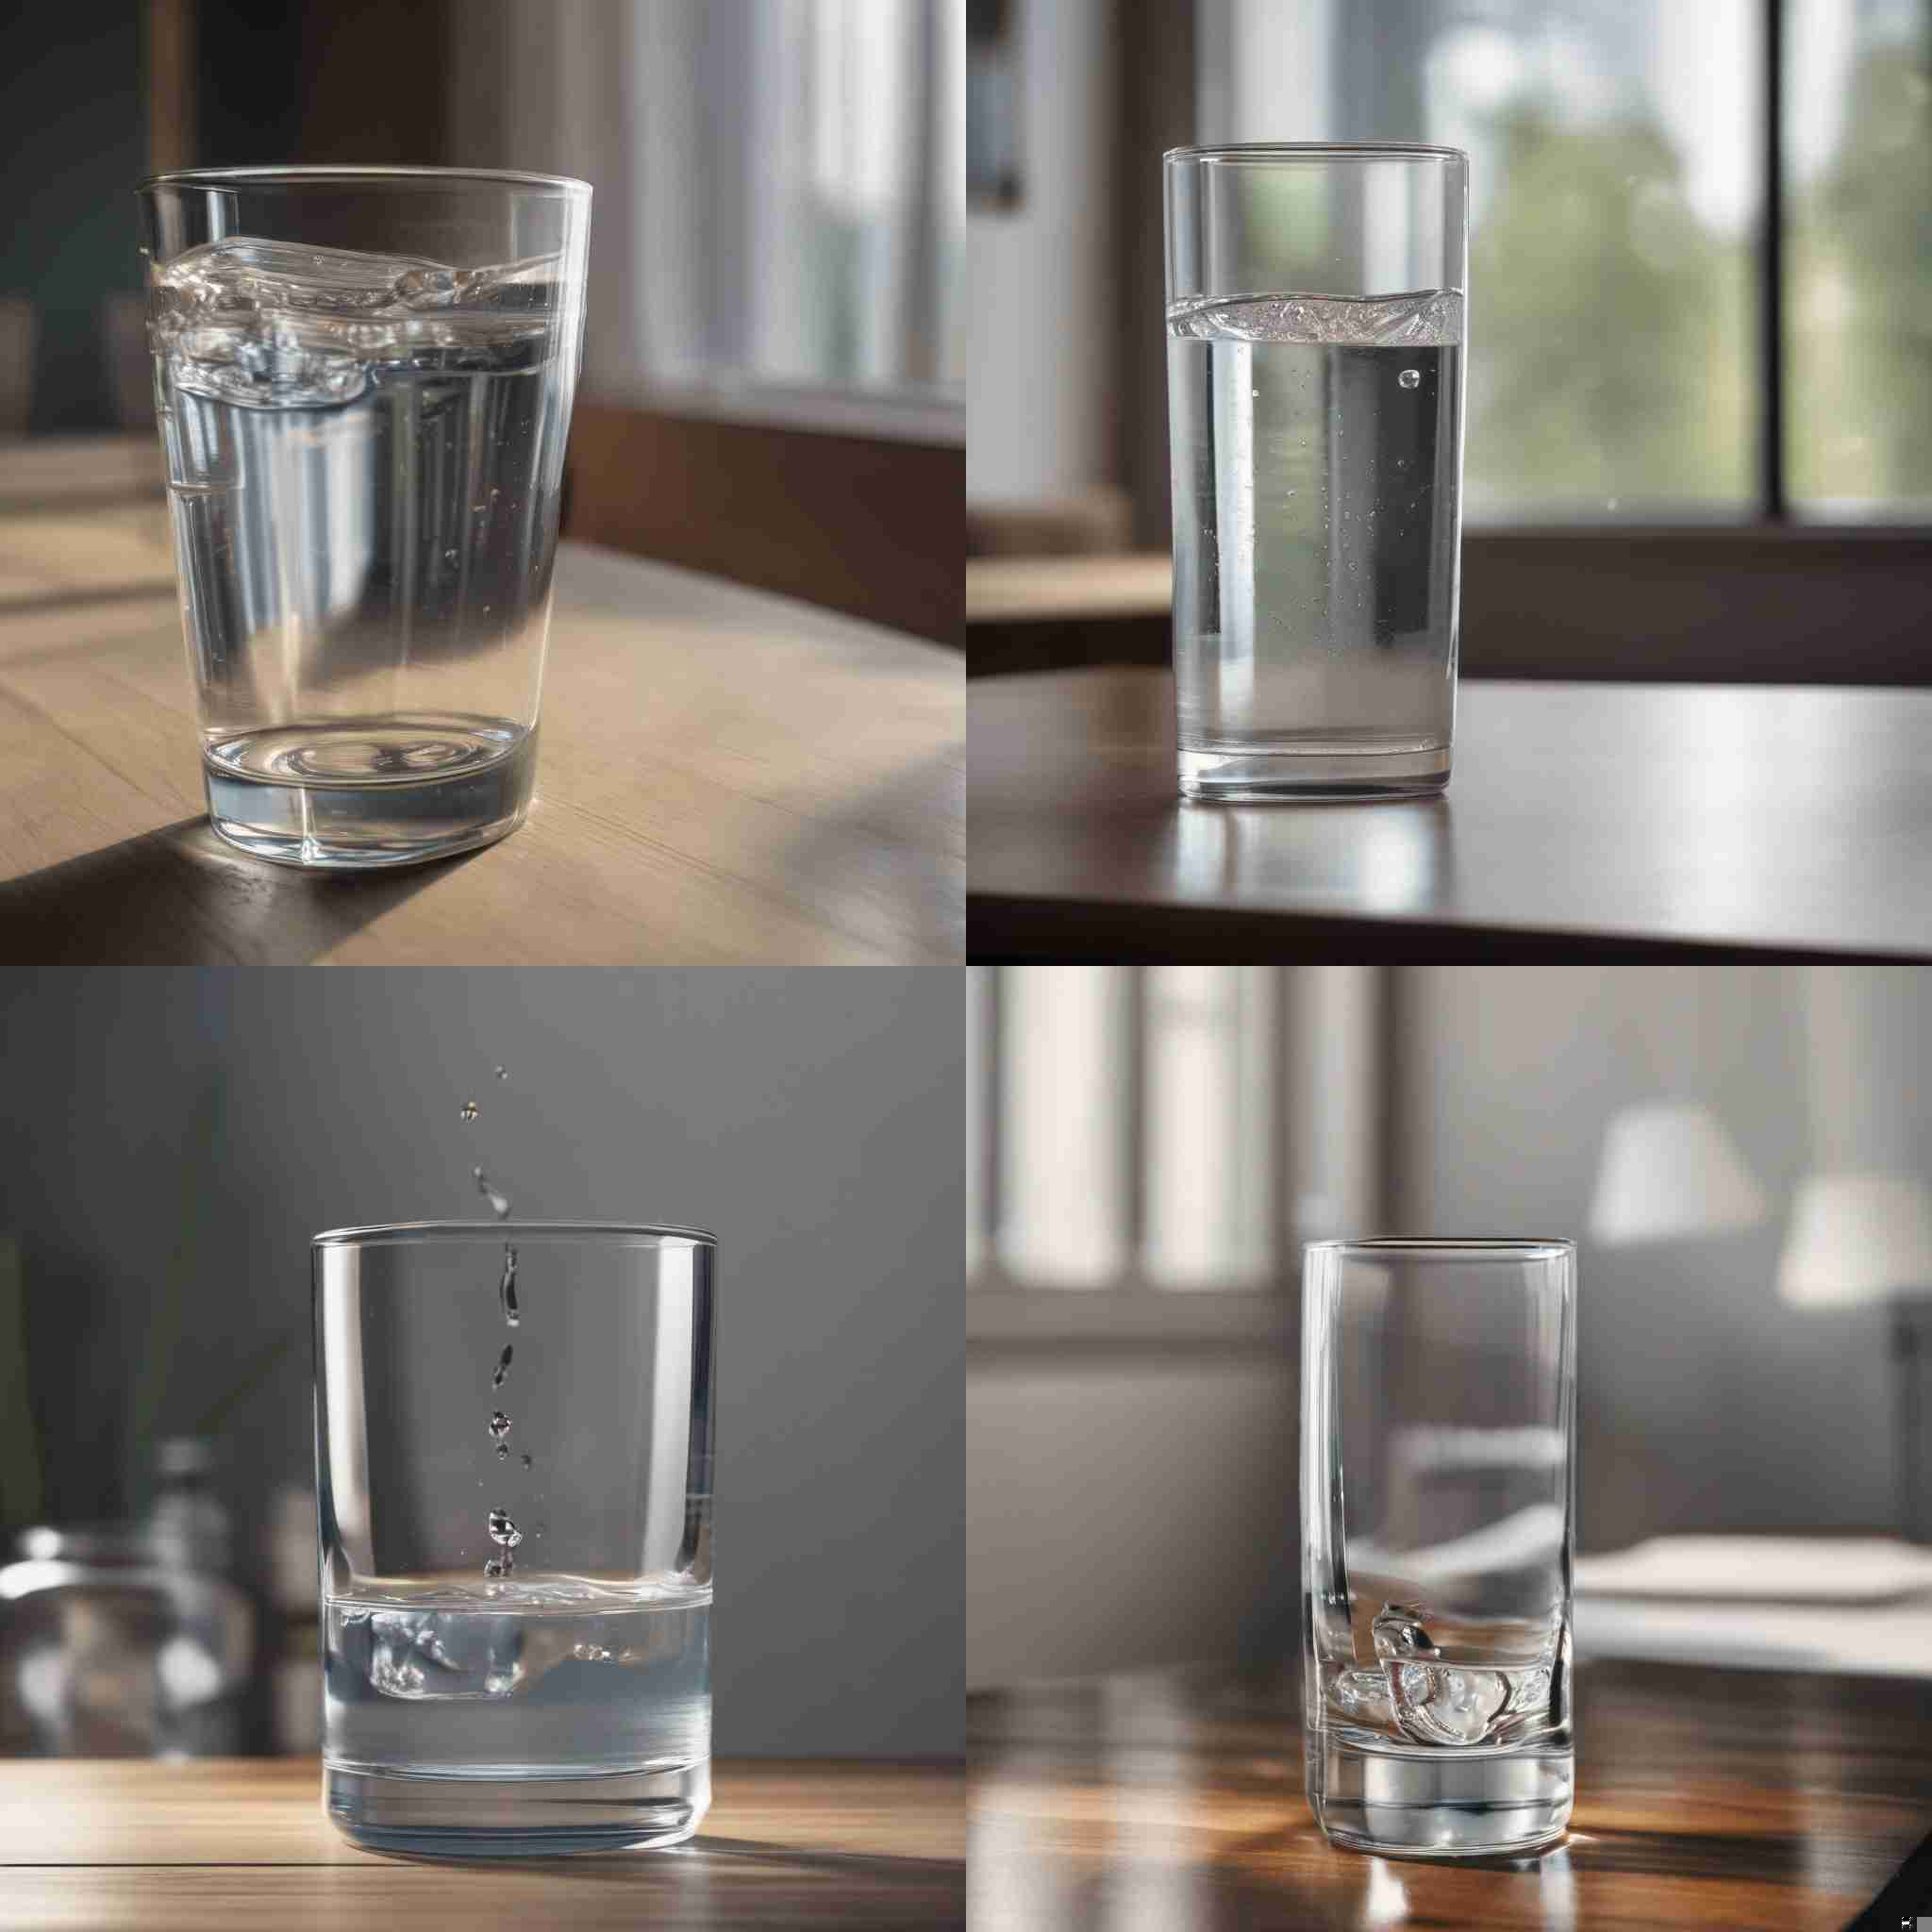 A glass of water placed on a table